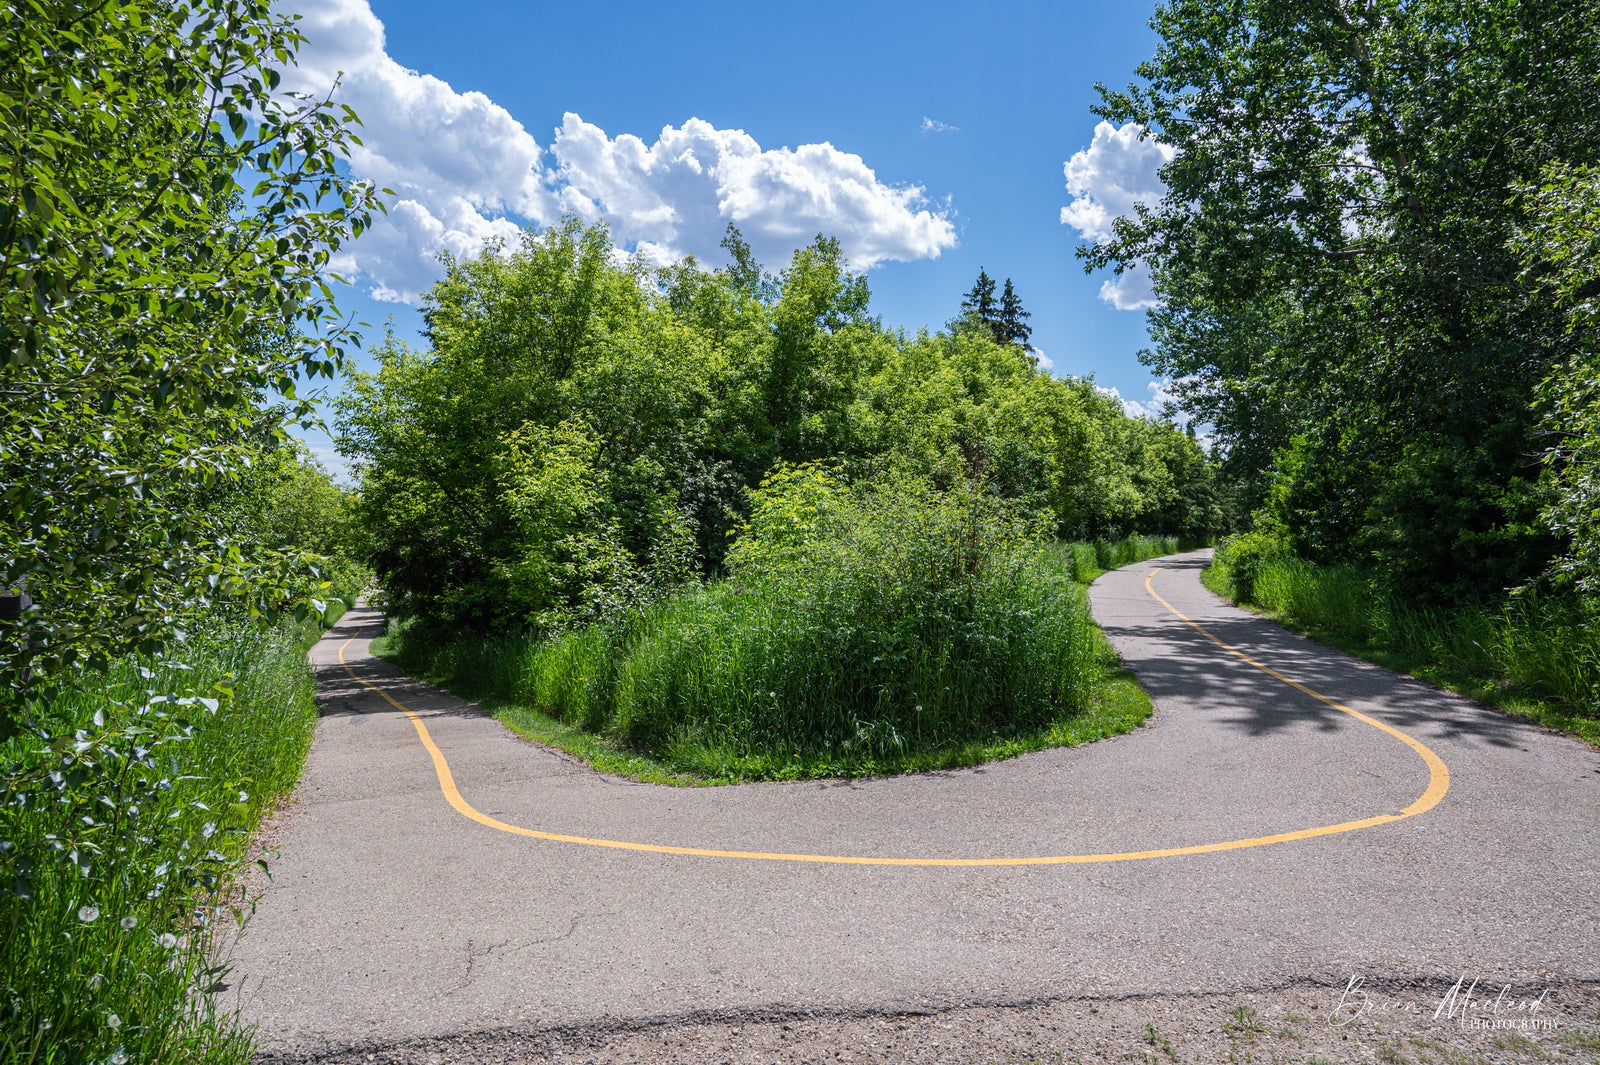 public path - hairpin turn - yellow line down the middle, in Oakmont, St Albert